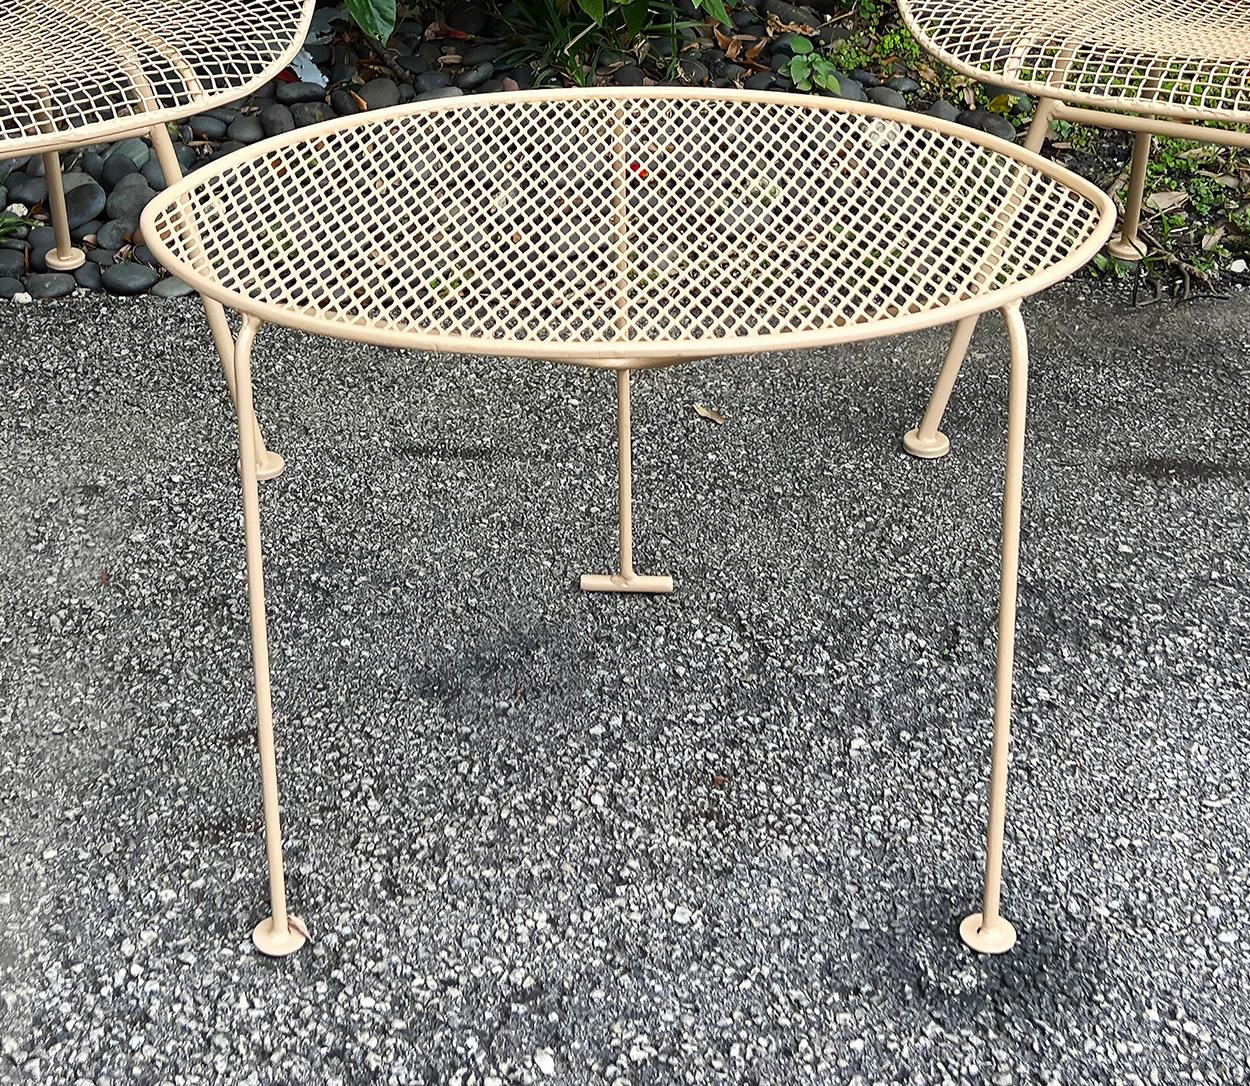 1950s patio furniture for sale